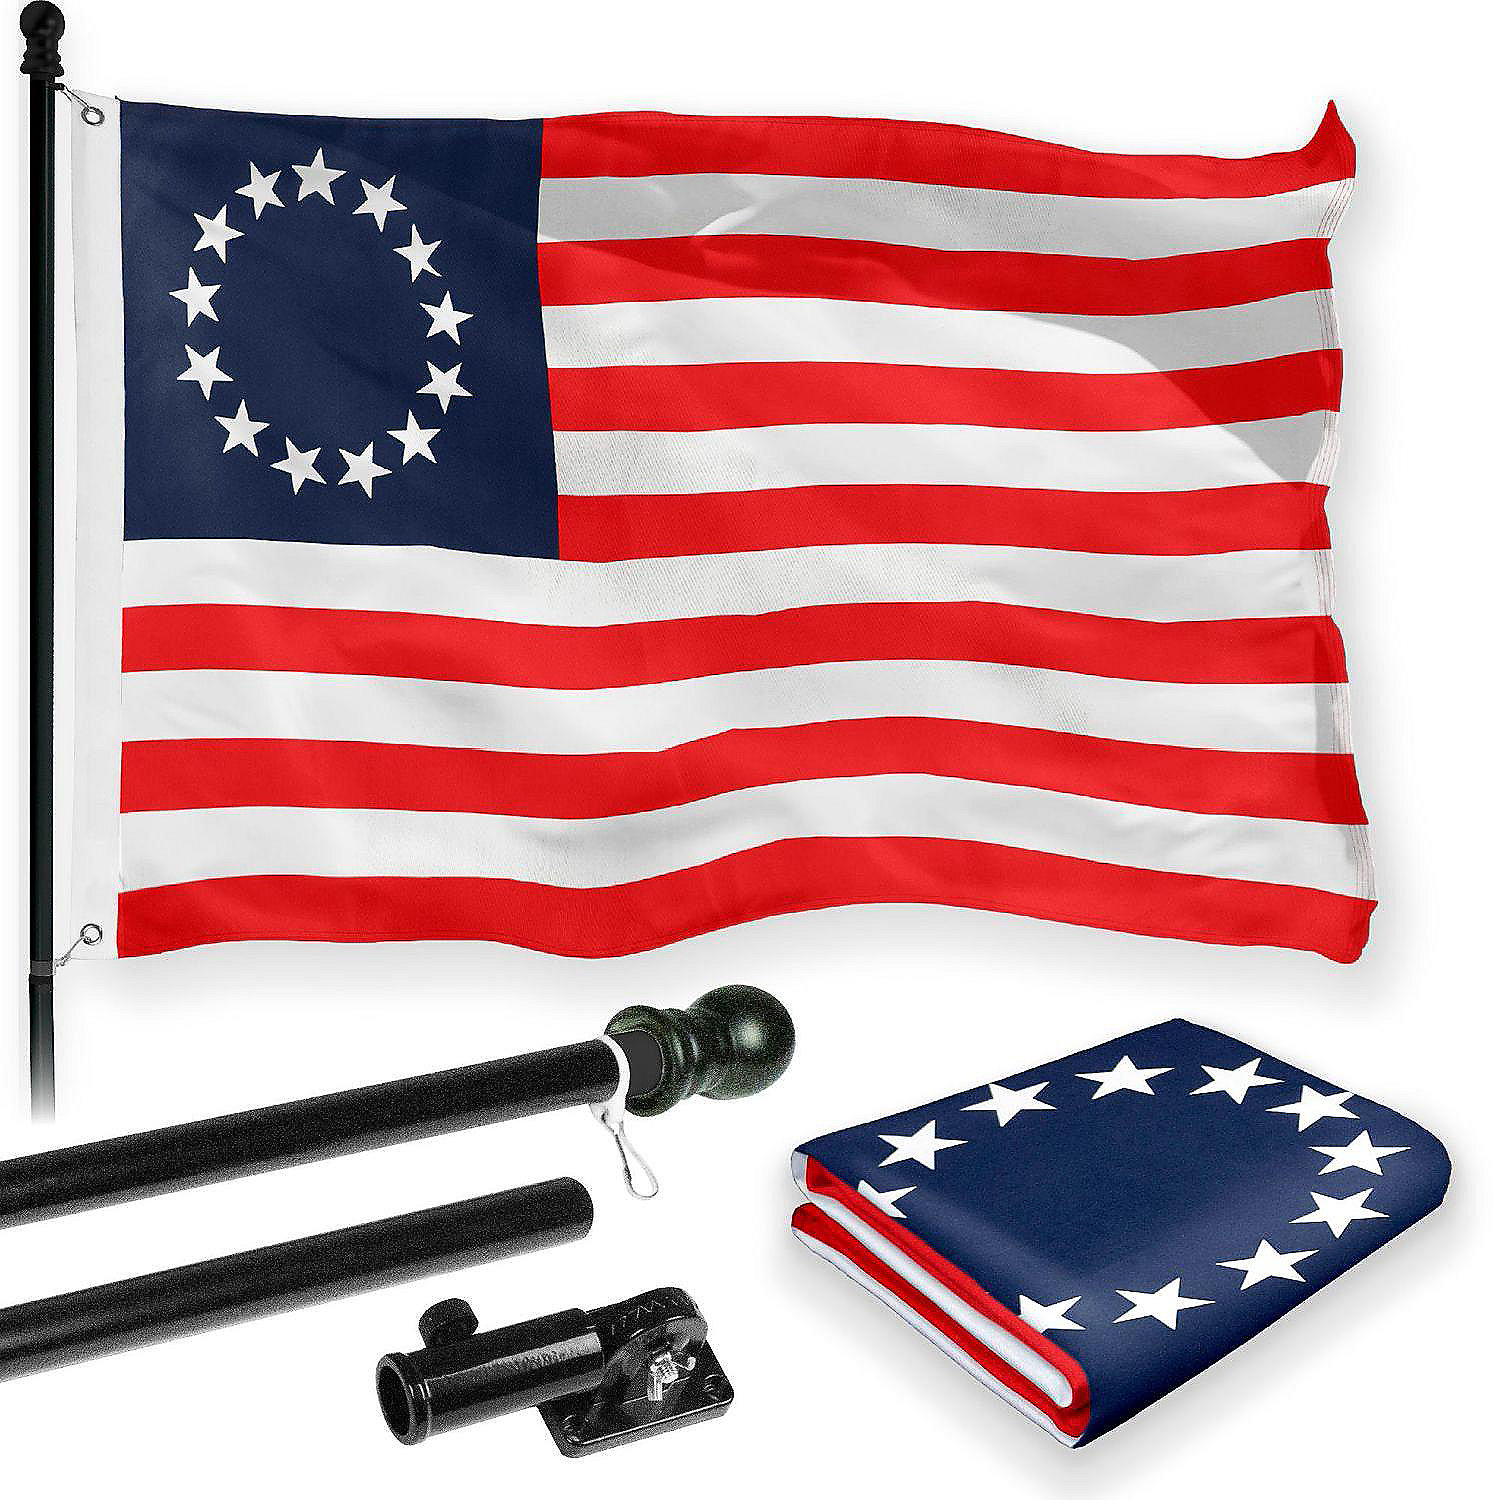 6 Foot Adjustable Aluminum Spinning Flagpole for Grommet or House Flag Outdoor 